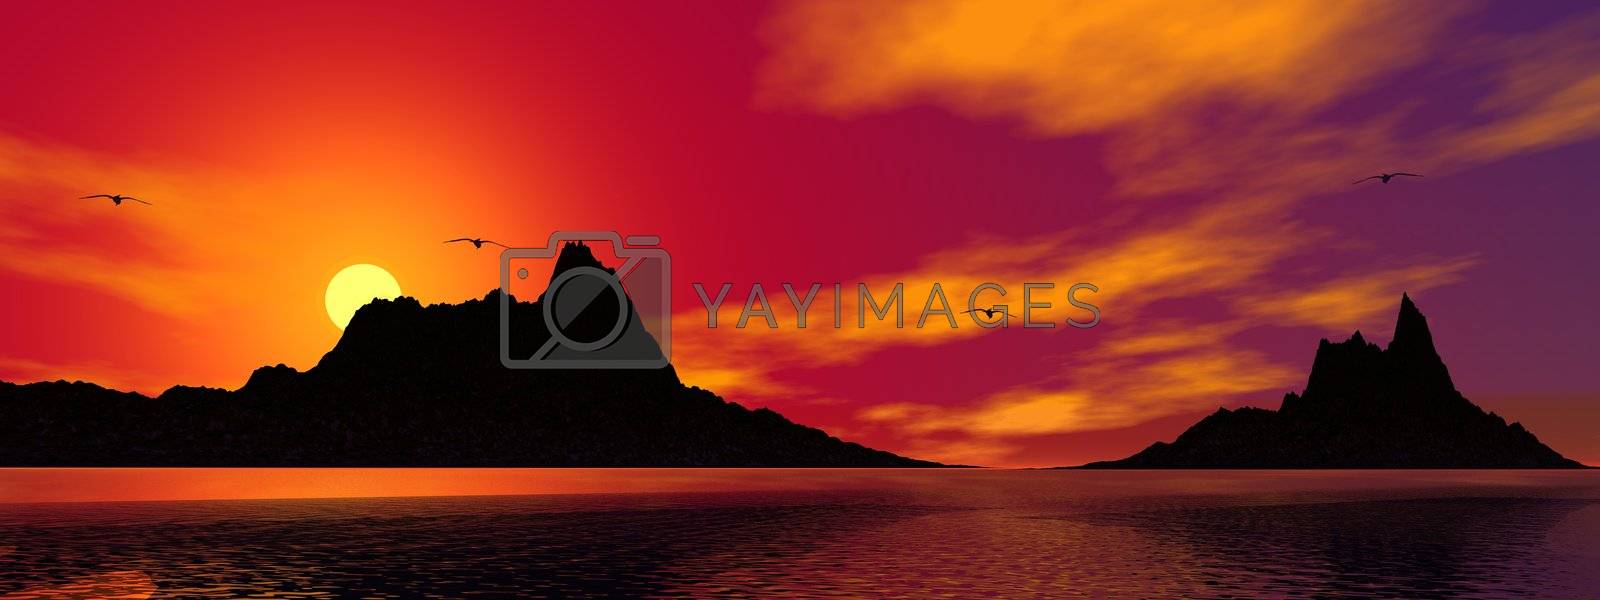 Royalty free image of landscape by mariephotos